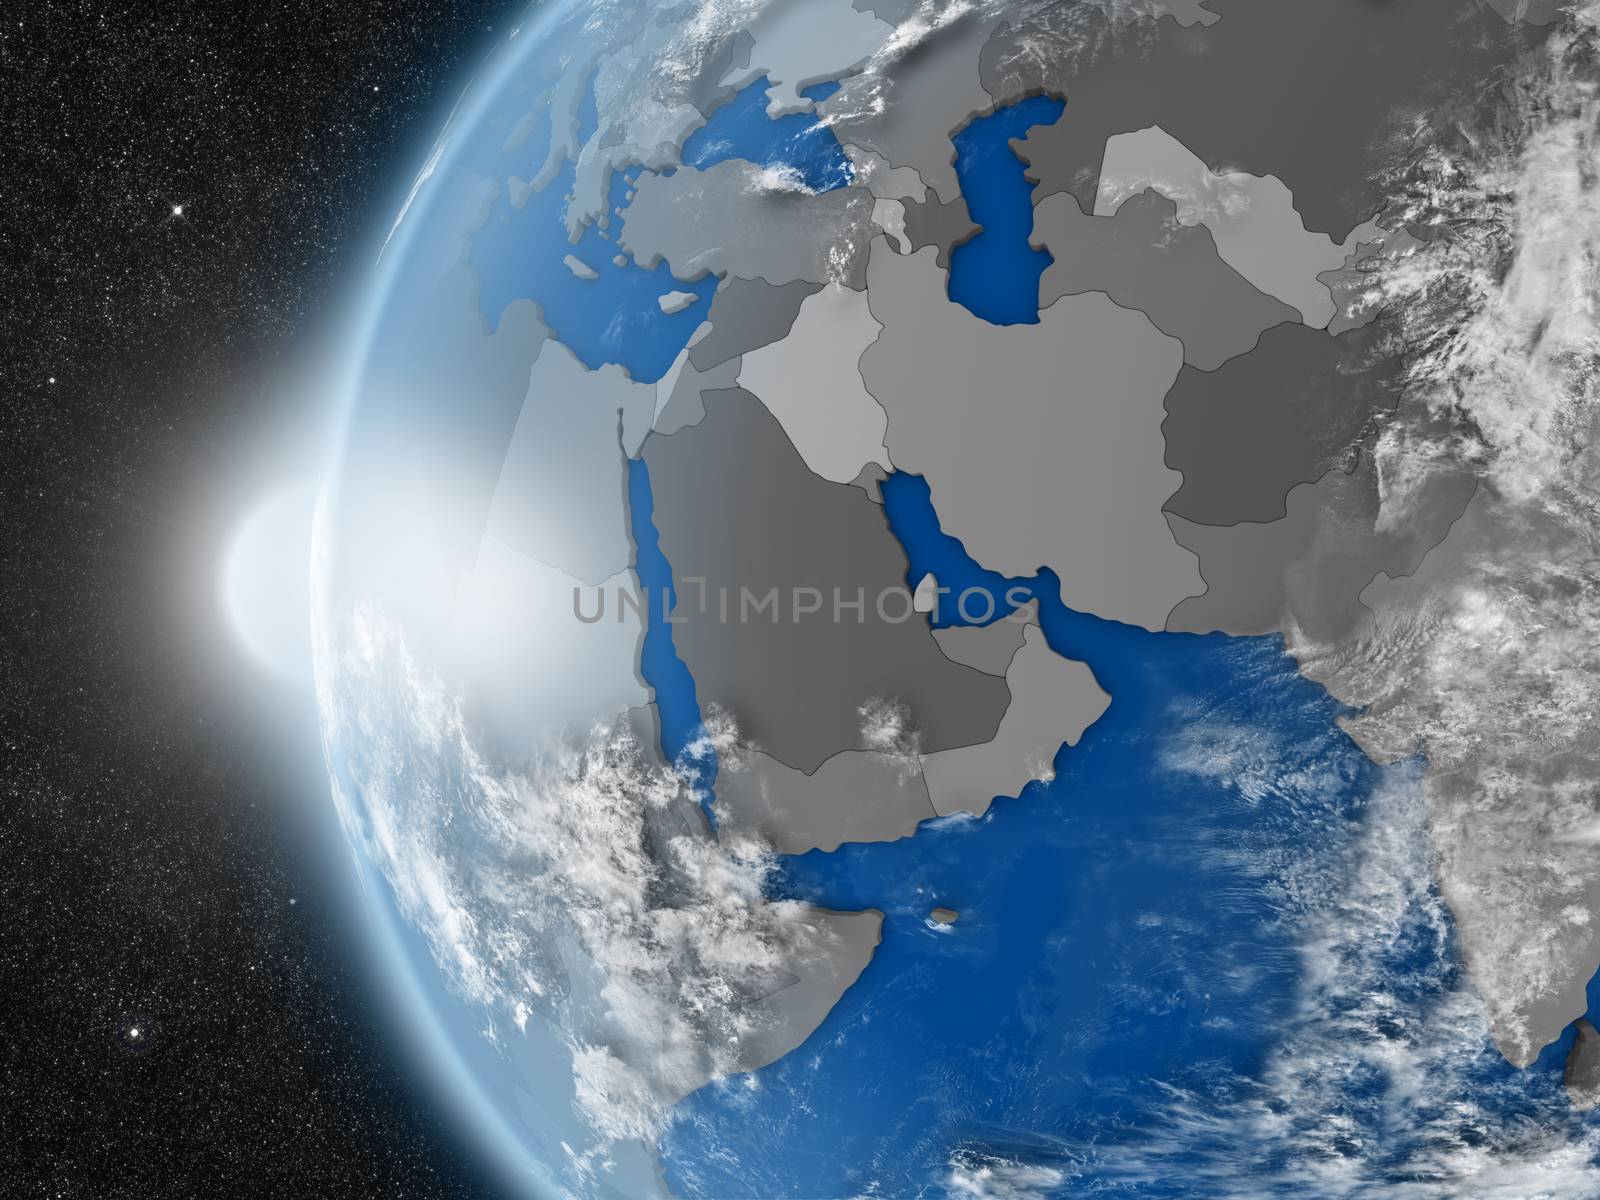 Concept of planet Earth as seen from space but with political borders aimed at middle east region